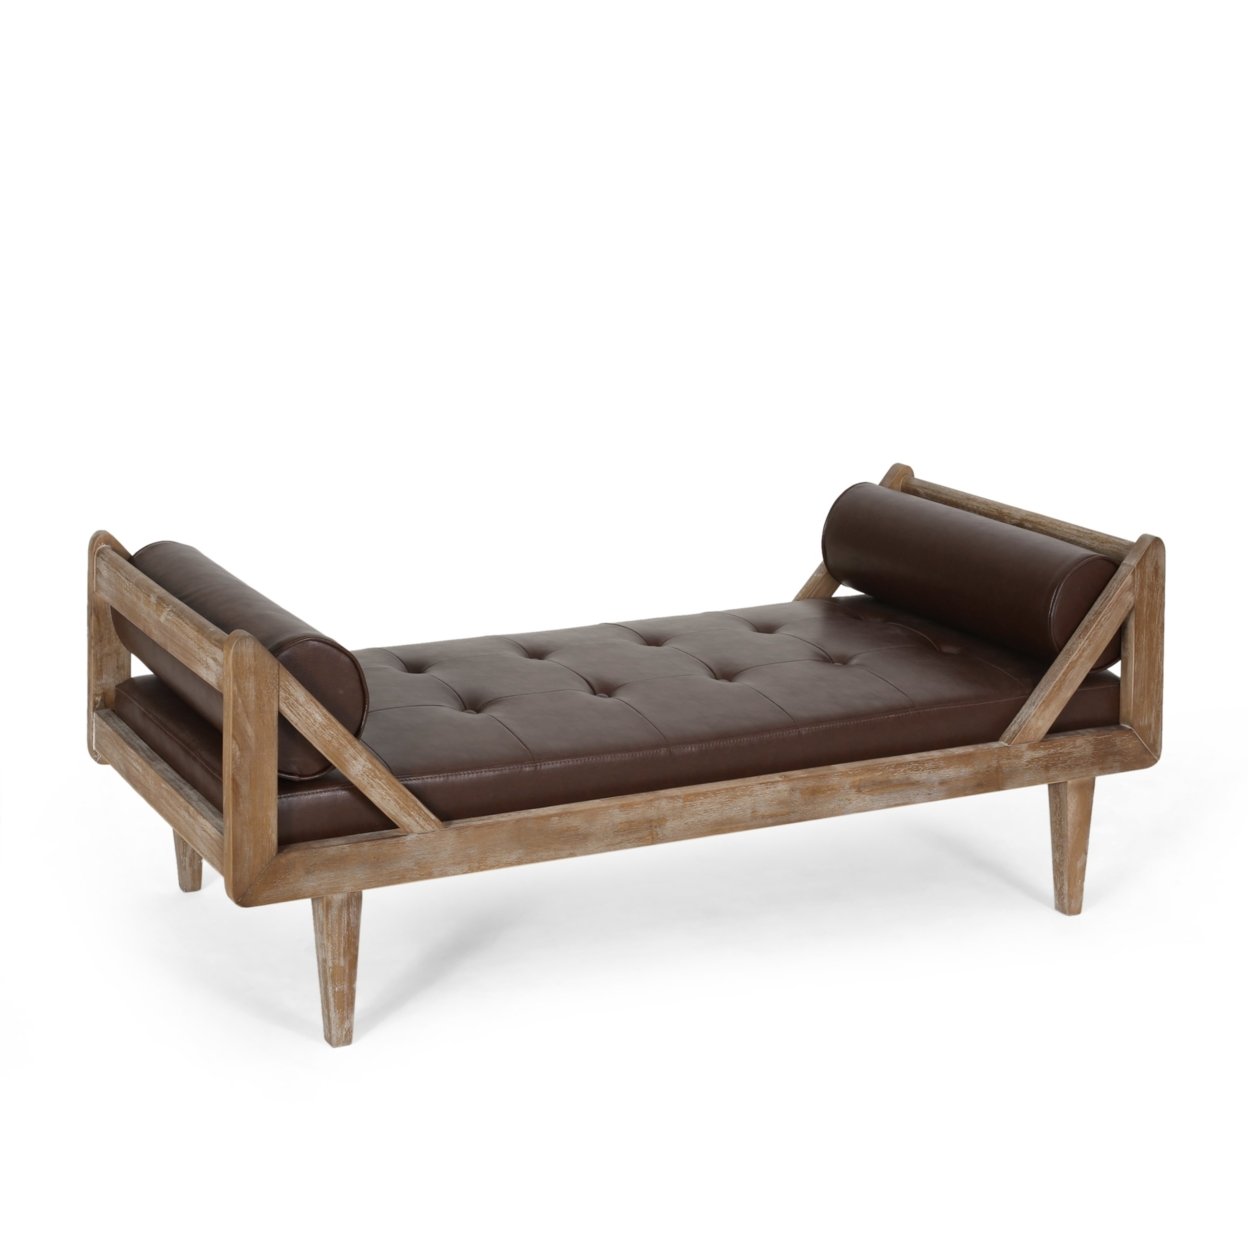 Huller Rustic Tufted Double End Chaise Lounge With Bolster Pillows - Dark Brown